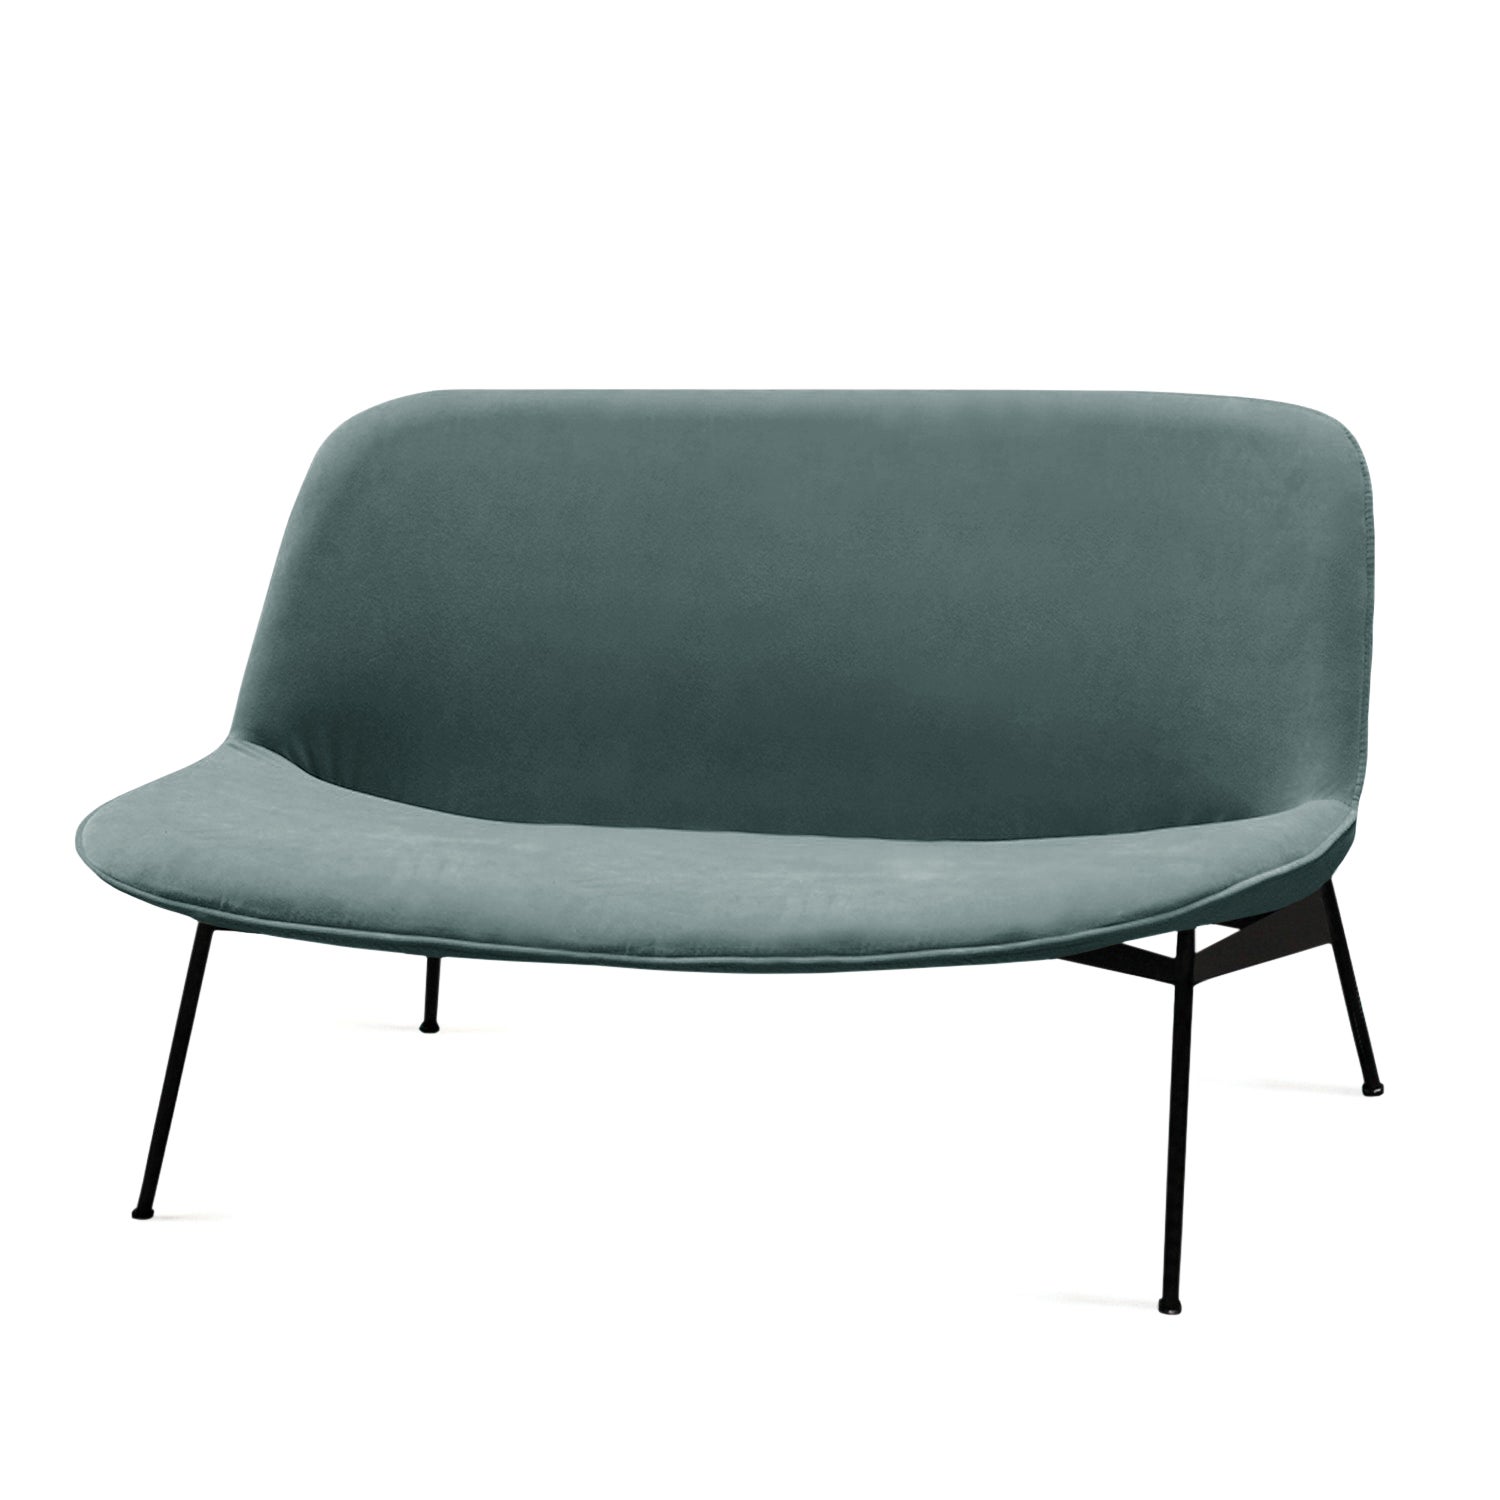 Chiado Sofa, Small with Teal and Black For Sale